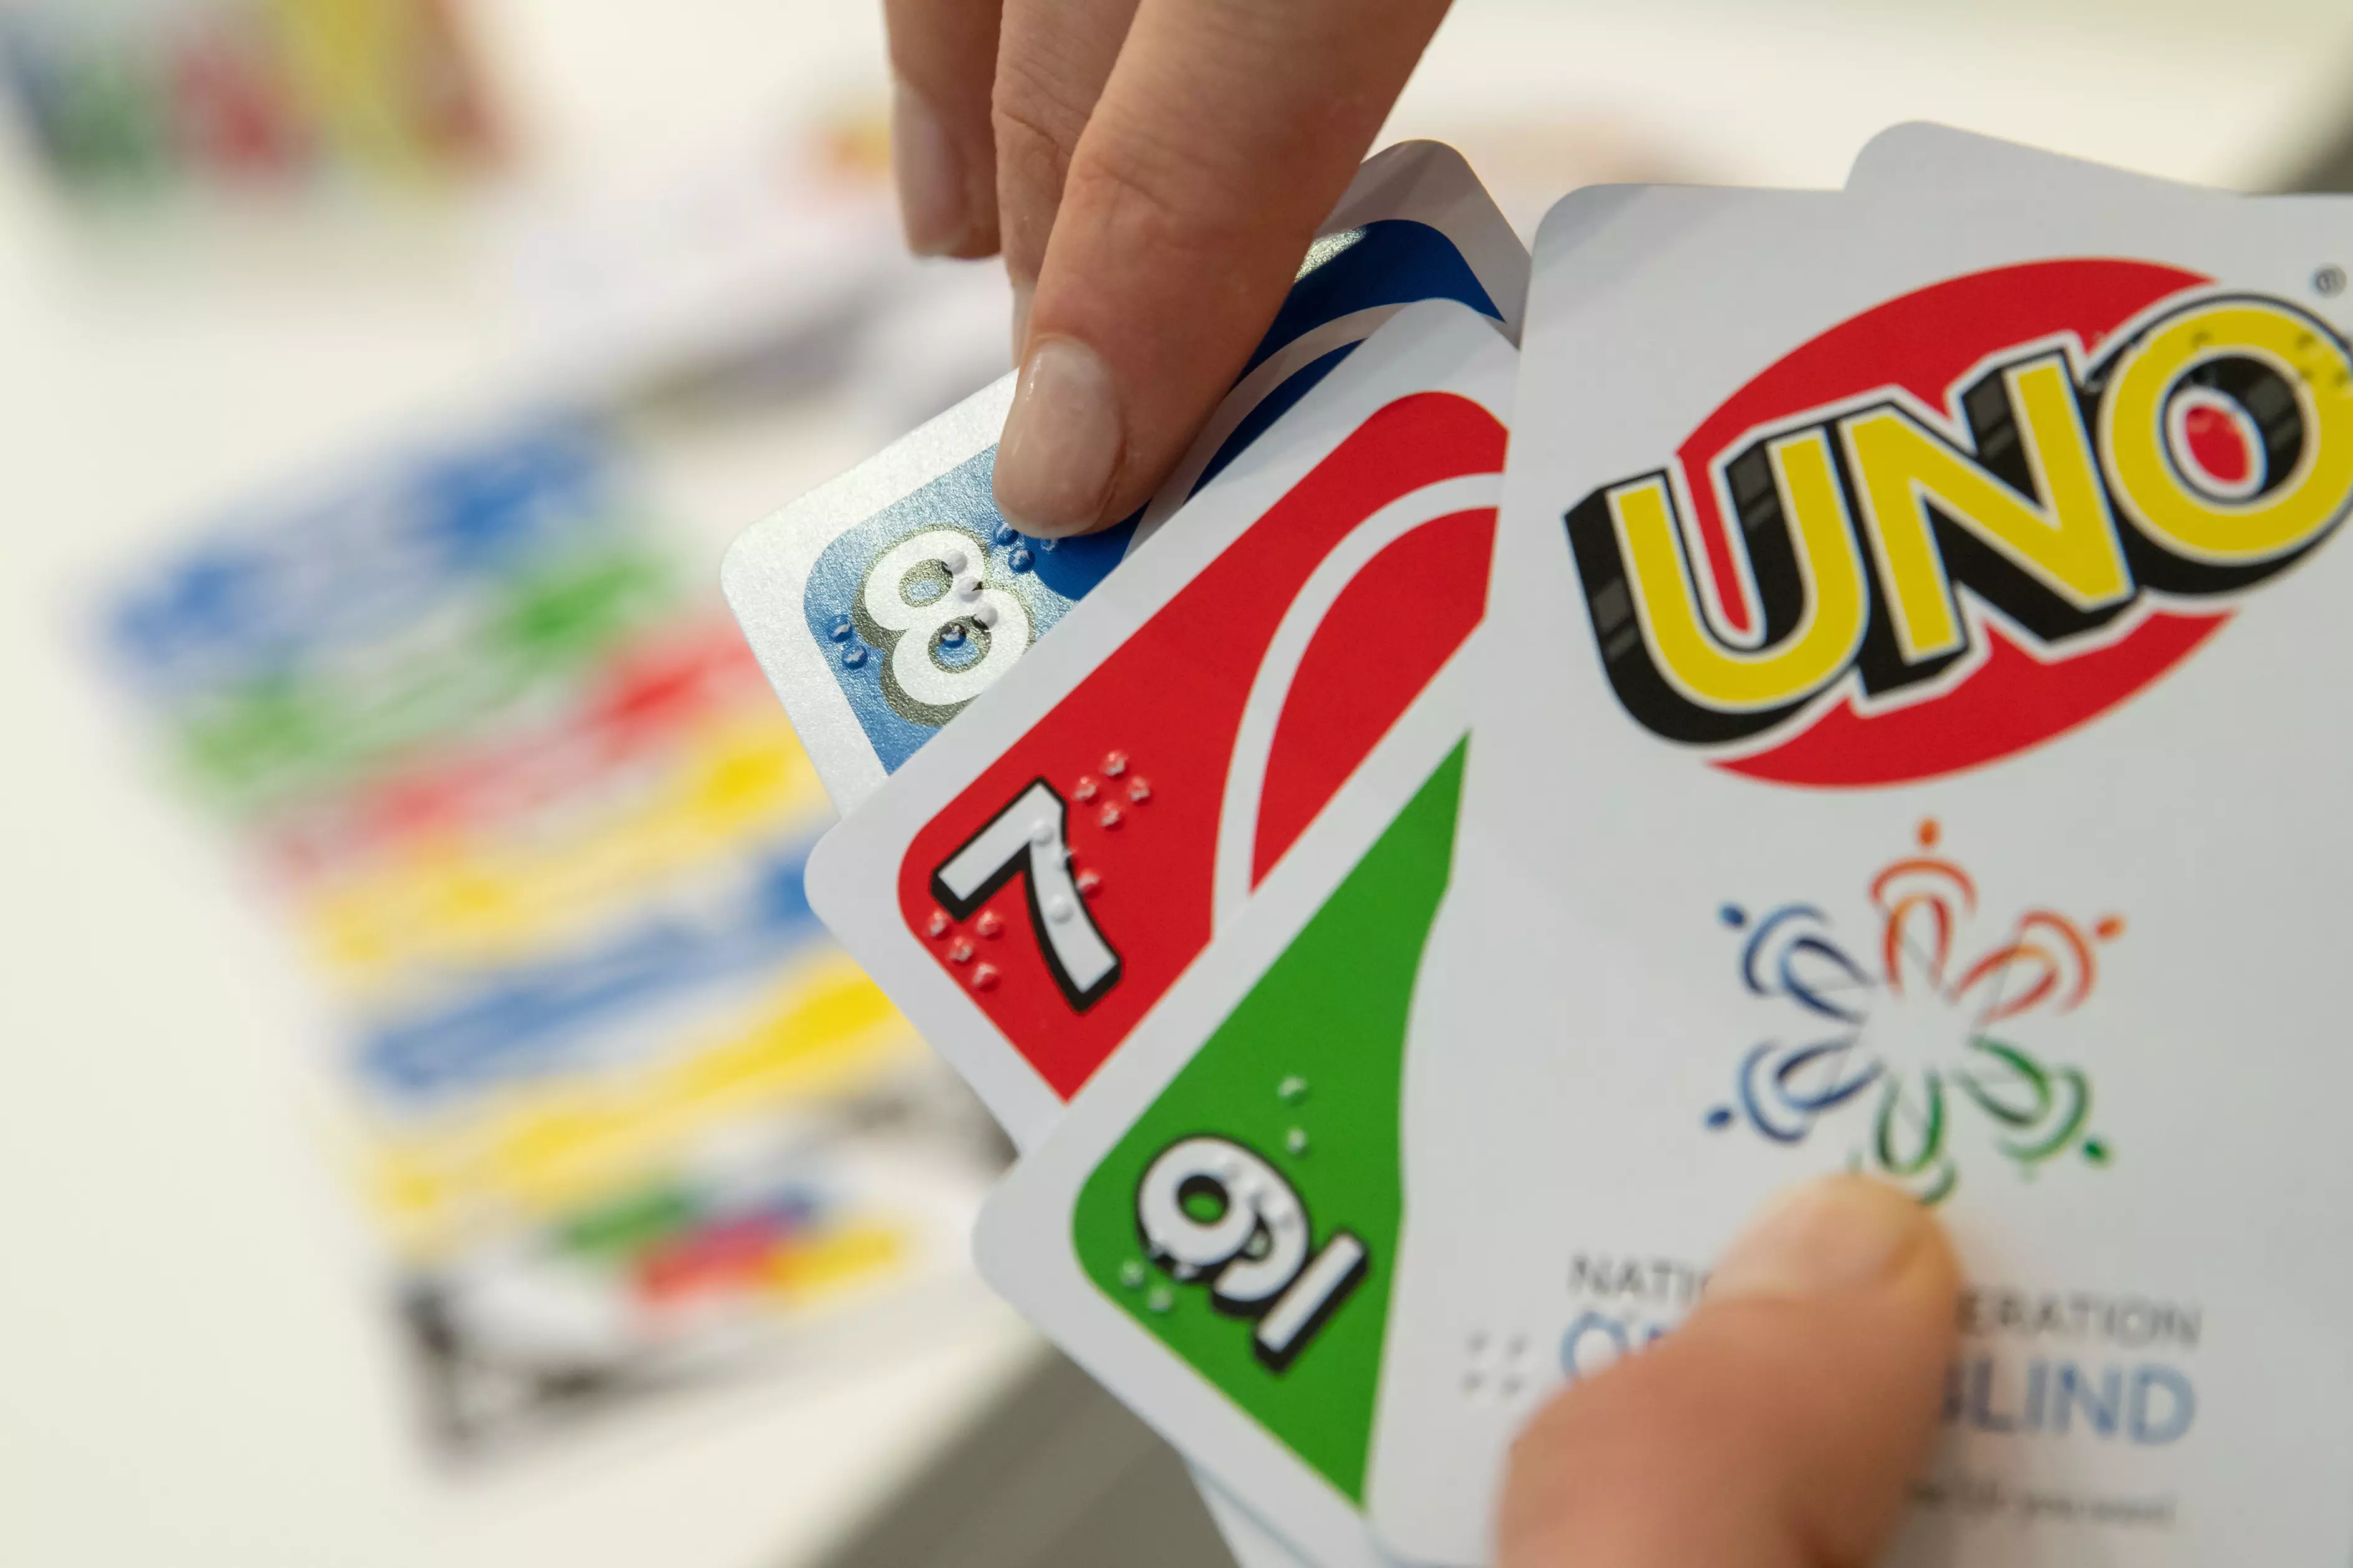 UNO clarified its rules on Twitter (